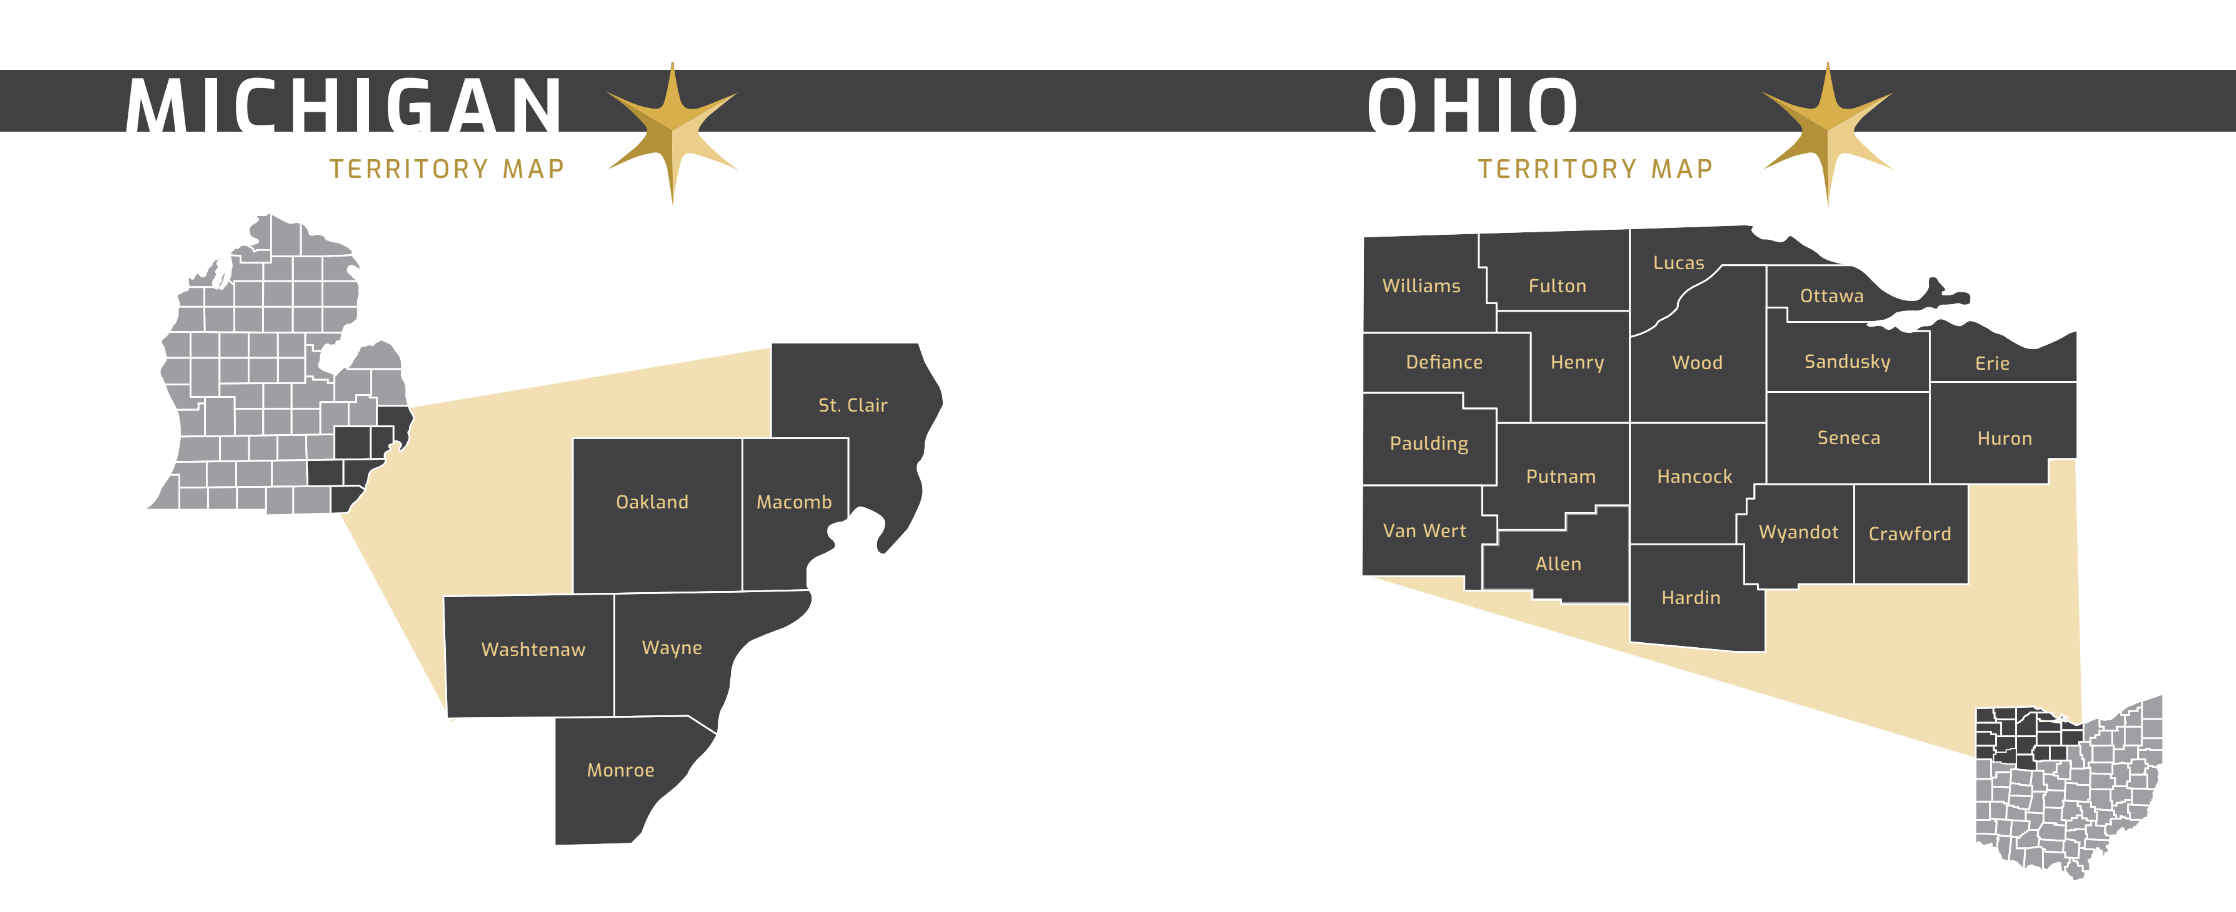 Clarus Territory map for Michigan and Ohio